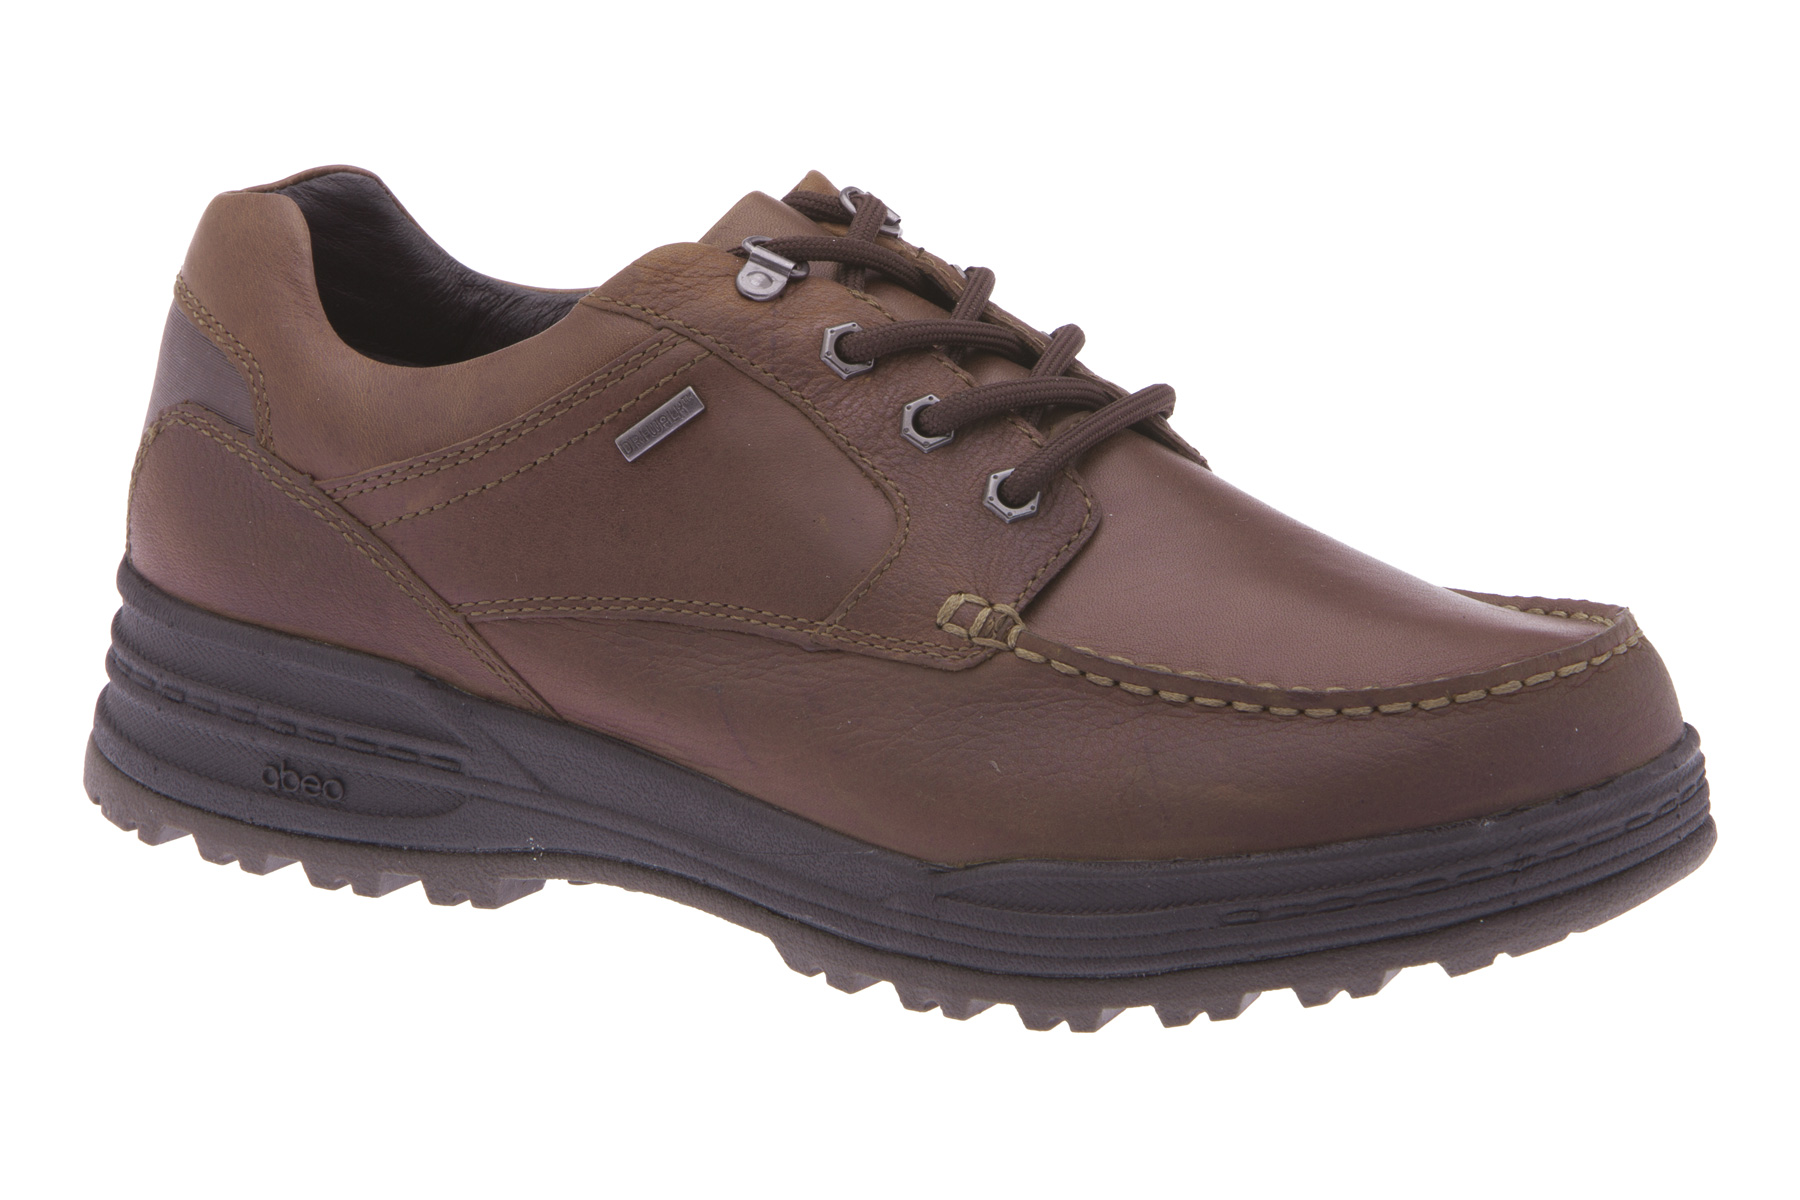 ABEO  Rayburn - Casual Shoes in Brown - image 1 of 6